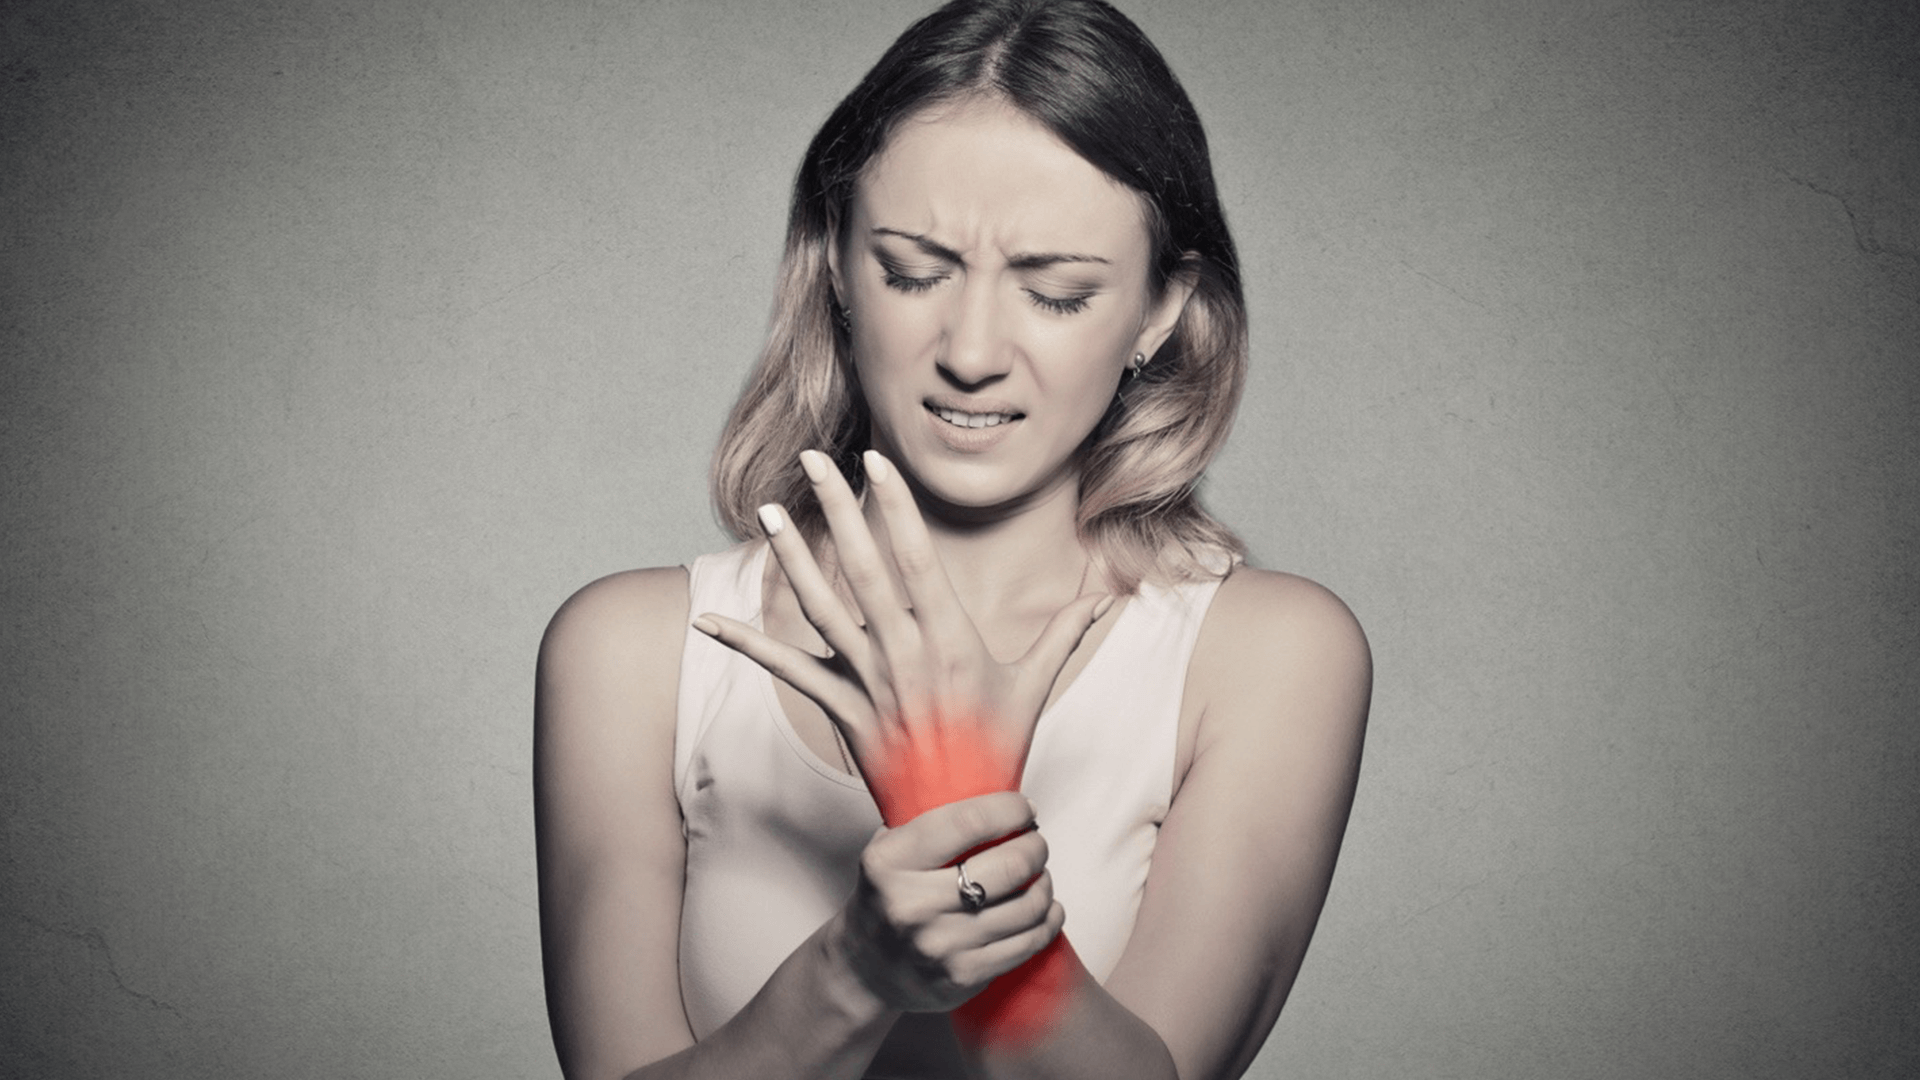 Carpal Tunnel Syndrome, or Not?